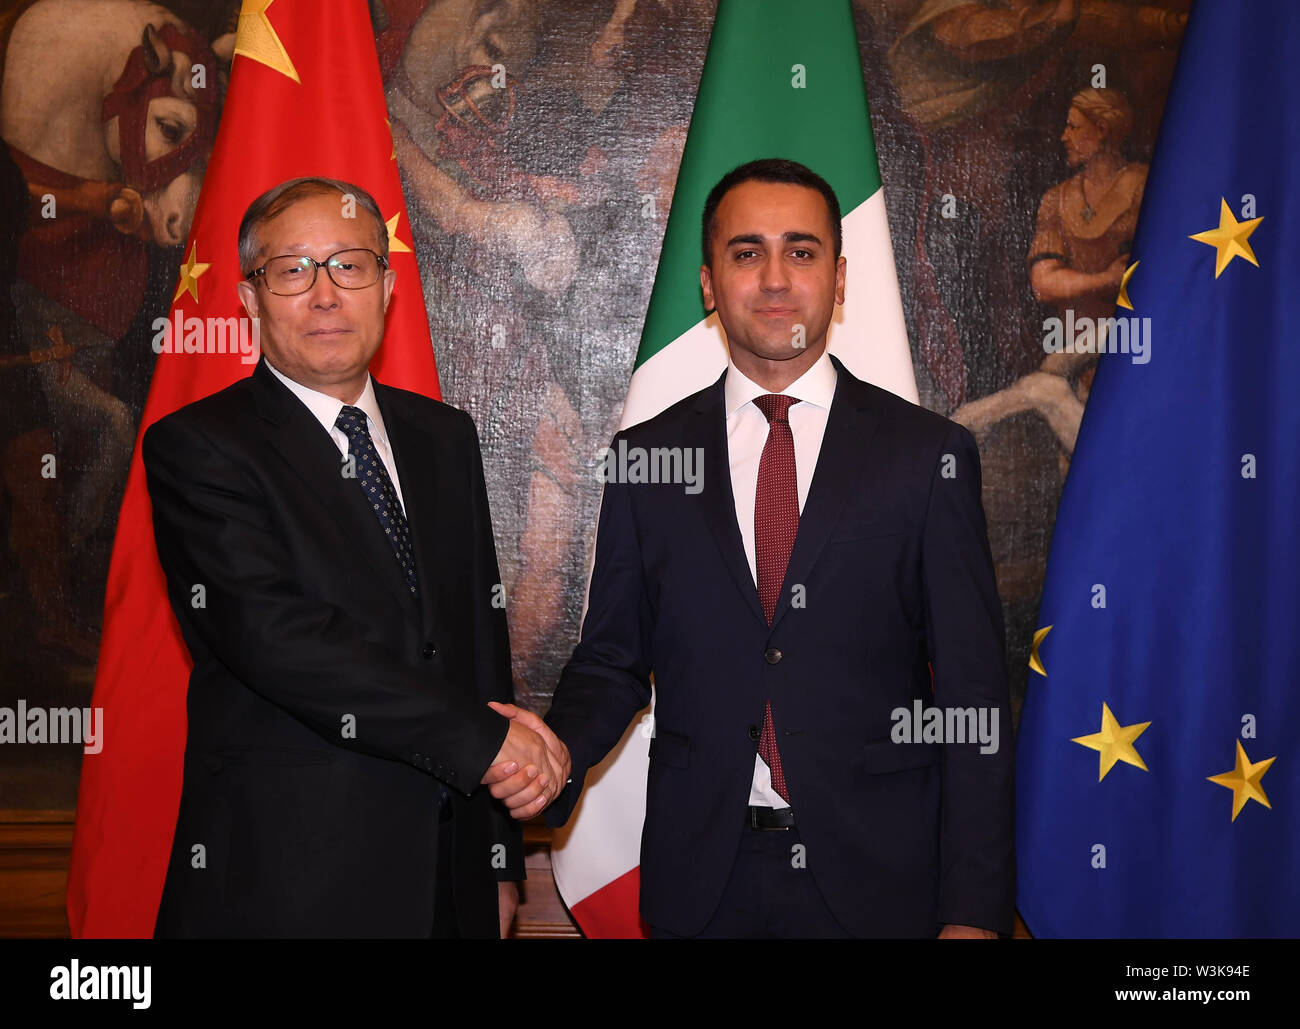 Rome, Italy. 15th July, 2019. Li Hongzhong (L), a member of the Political Bureau of the Communist Party of China (CPC) Central Committee and Secretary of the CPC Tianjin Municipal Committee, meets with Luigi Di Maio, Italian deputy prime minister and economic development minister, in Rome, Italy, July 15, 2019. A delegation of the CPC headed by Li concluded its four-day visit to Italy at the invitation of Italian government on Tuesday. Credit: Alberto Lingria/Xinhua/Alamy Live News Stock Photo